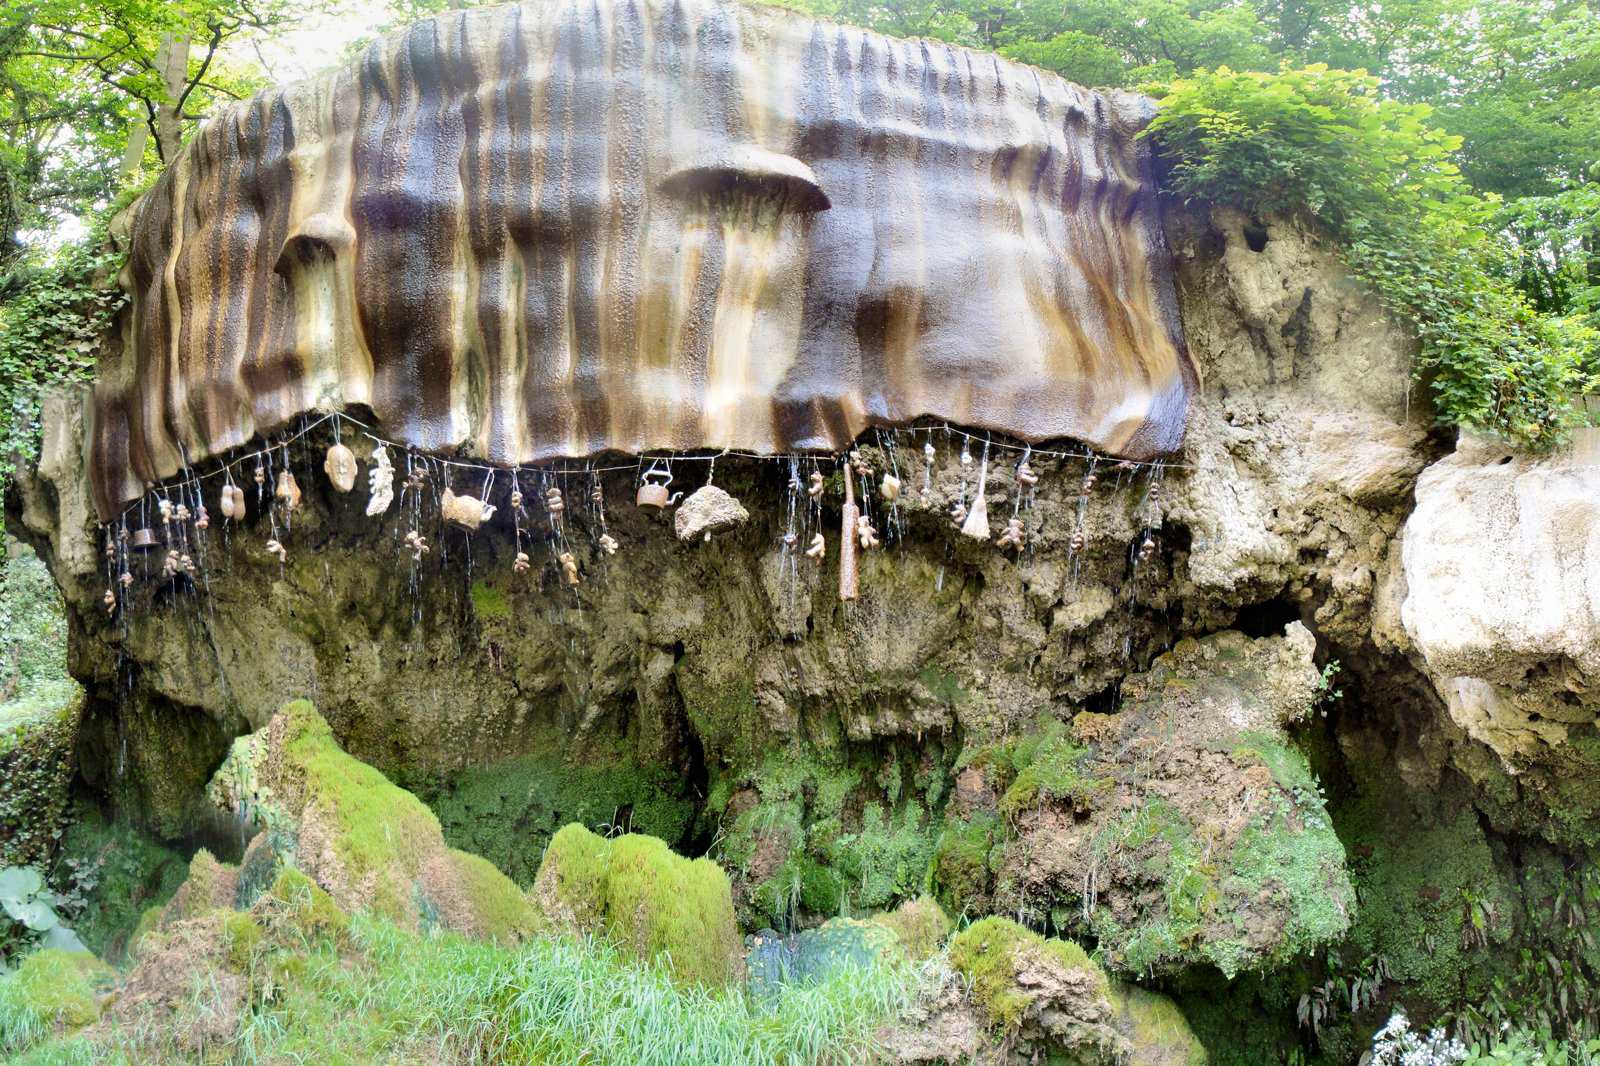 The Petrifying Well at Mother Shipton's Cave